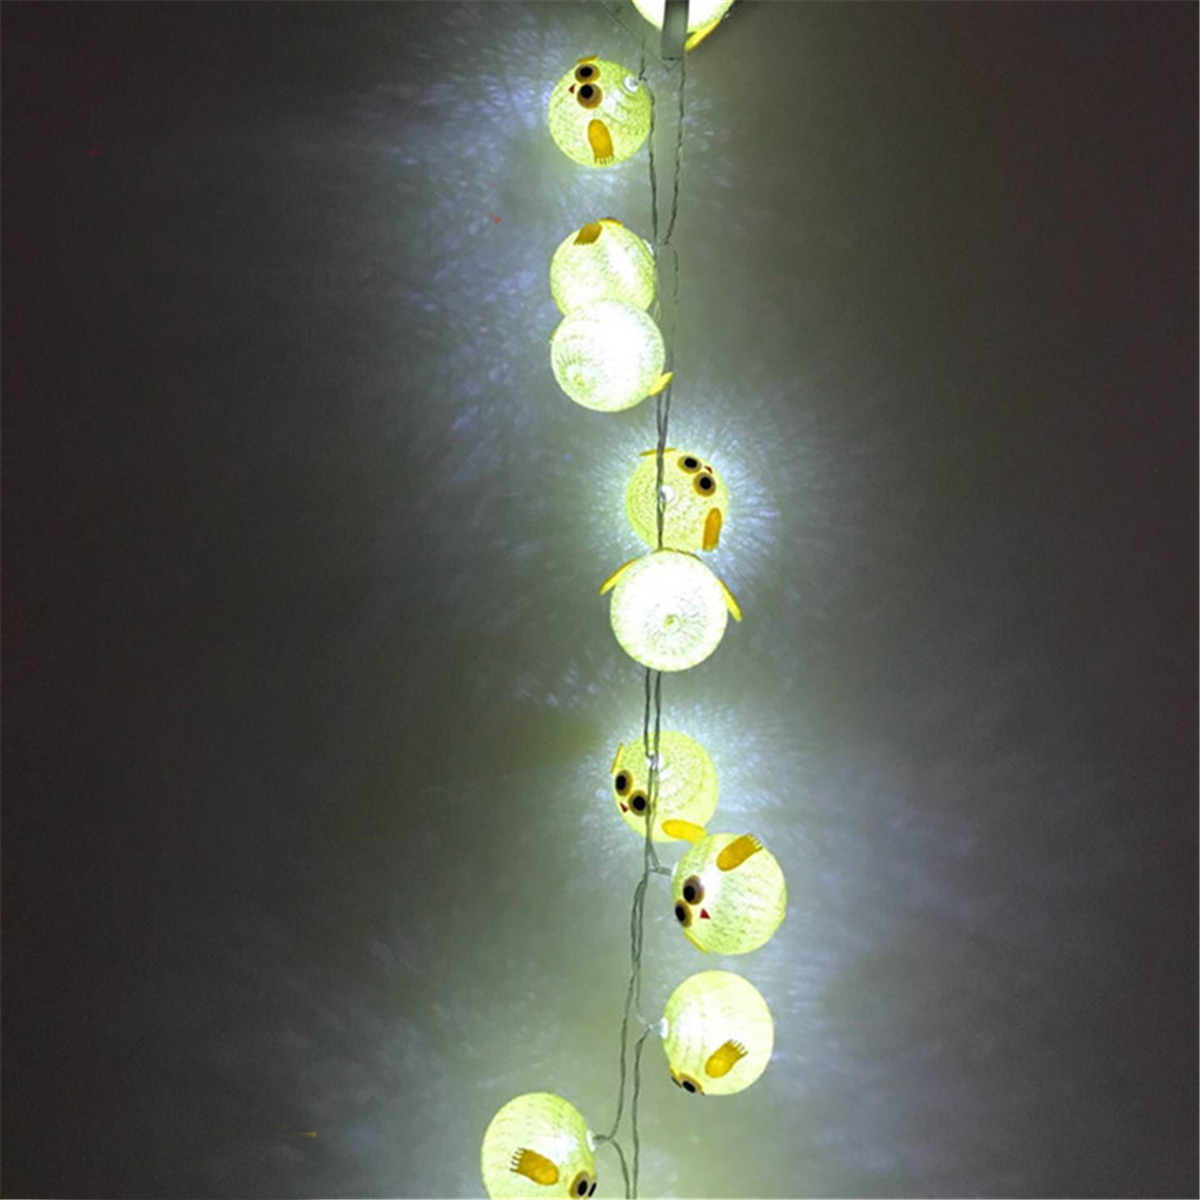 101520-Chicken-Cotton-Fairy-String-Light-Birthday-Party-Kids-Bedroom-Decorations-1640768-7